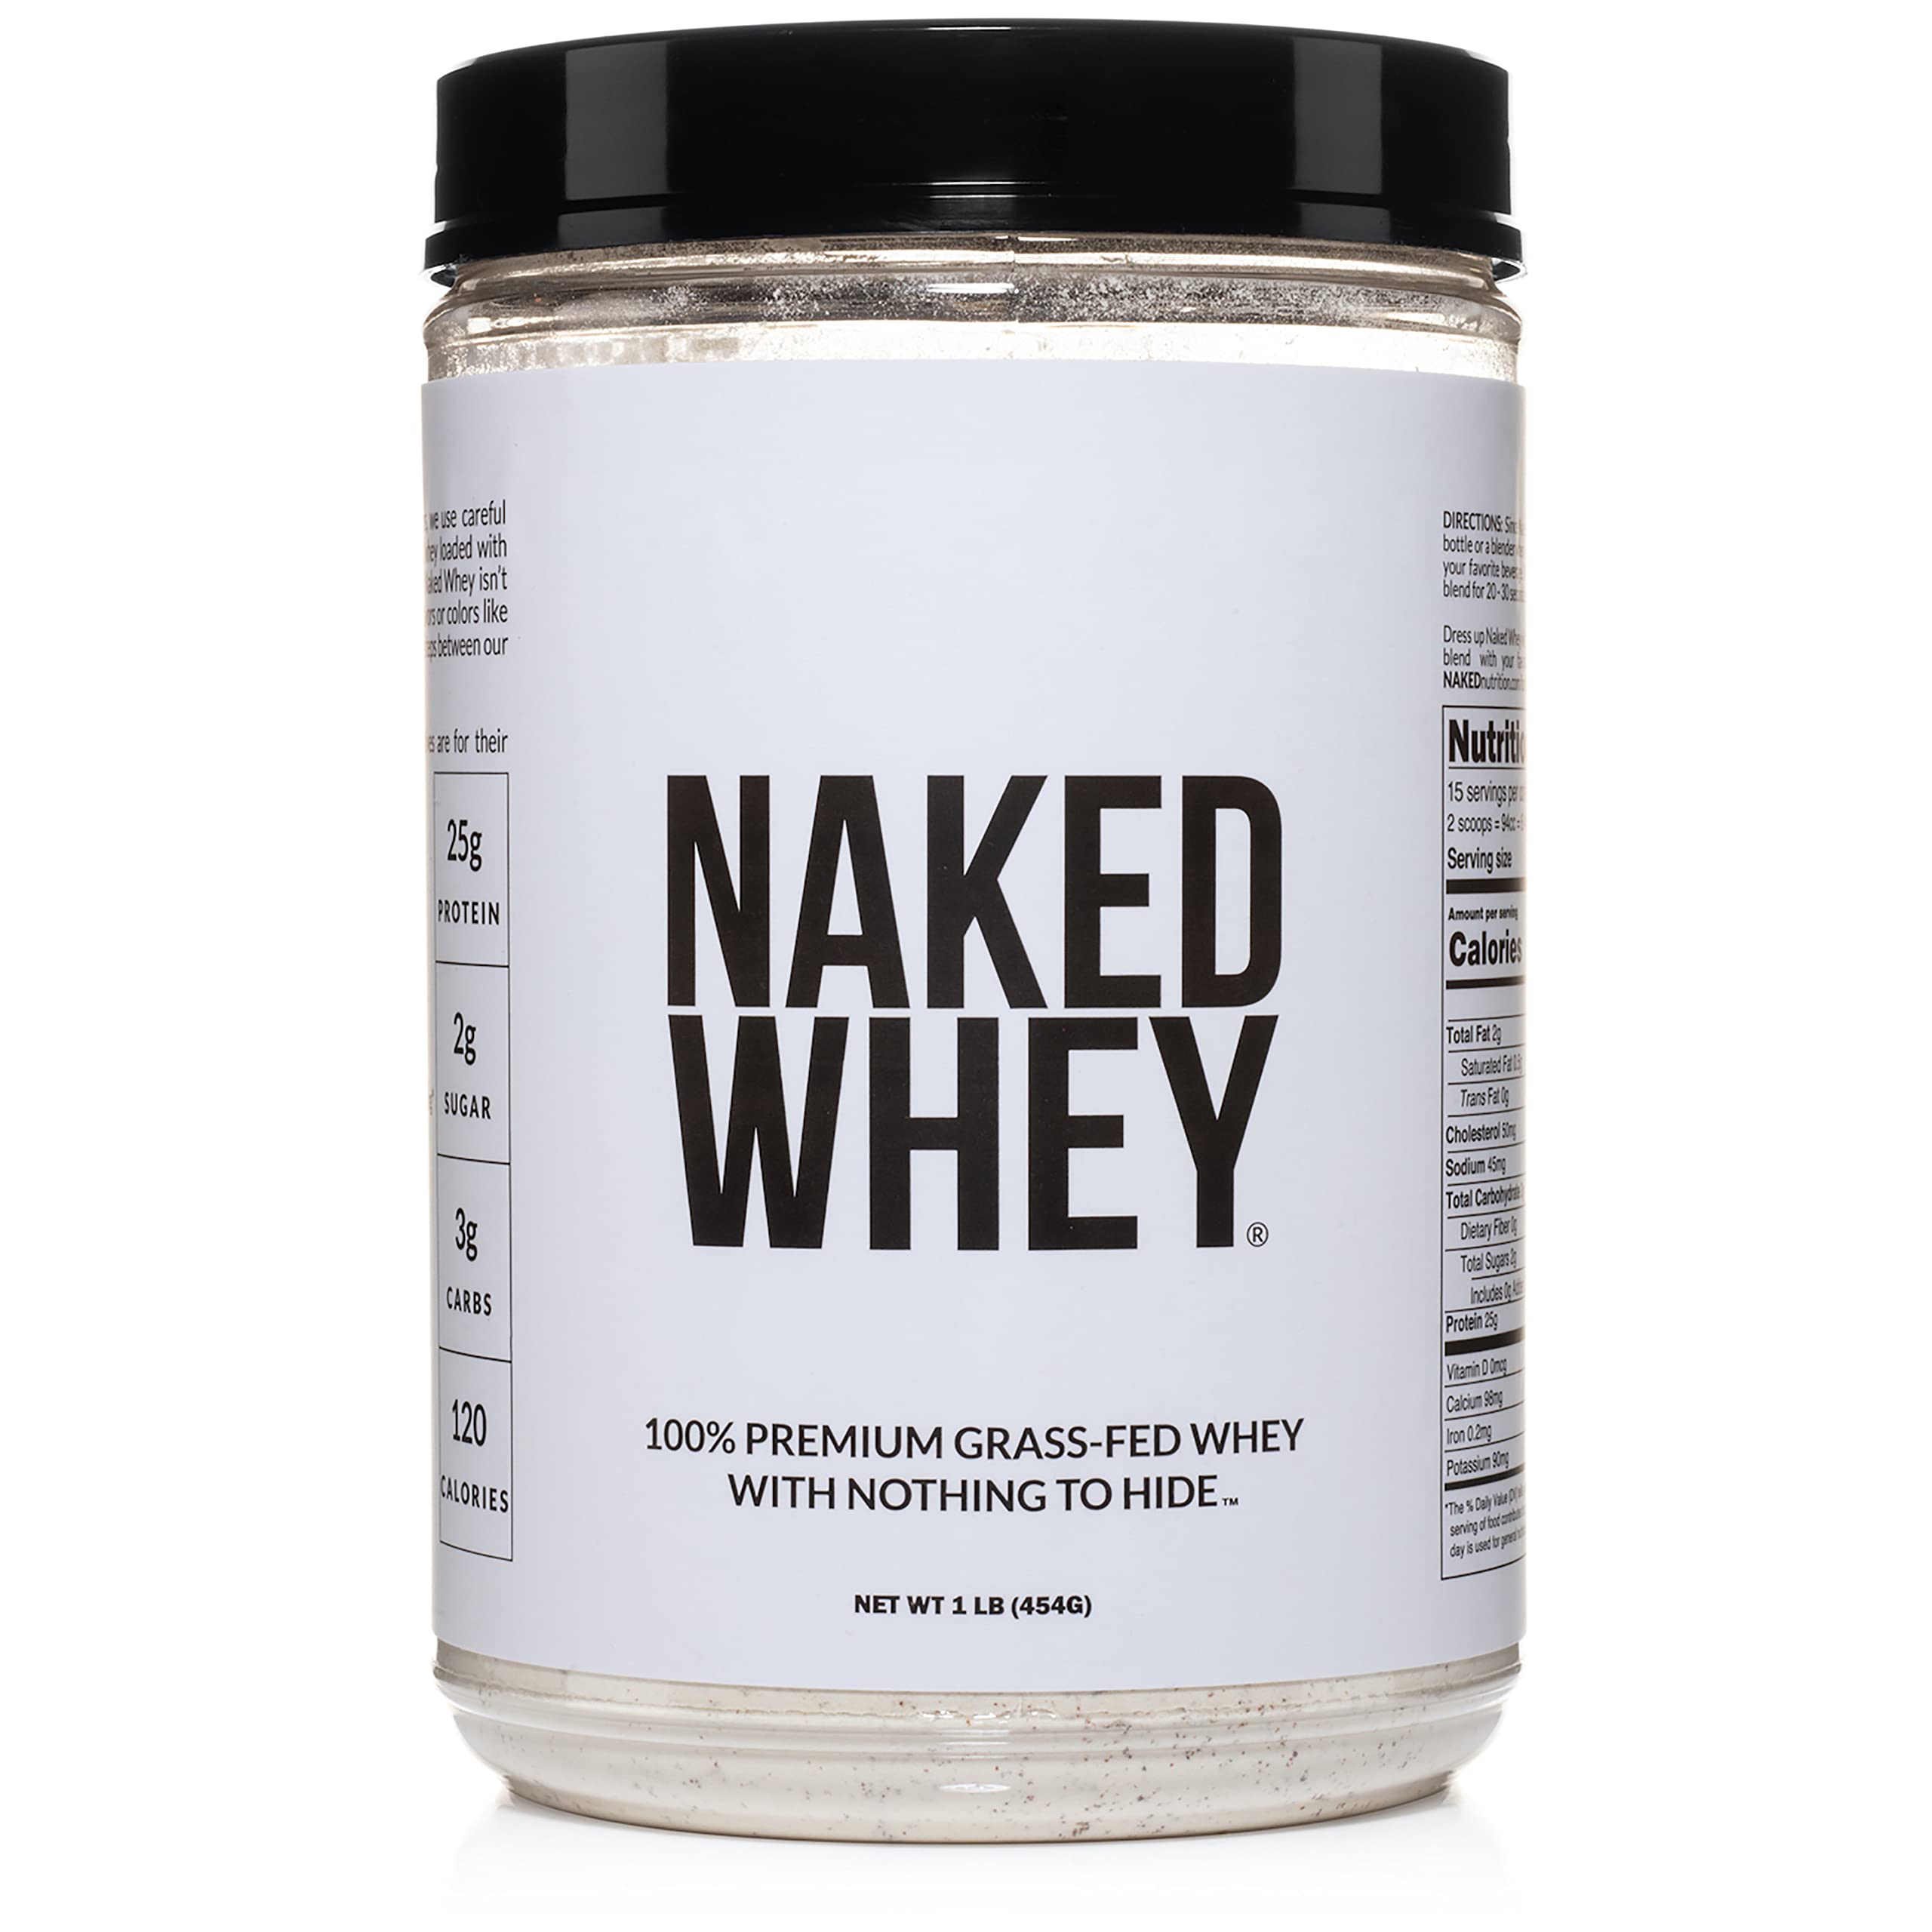 Book Cover Naked WHEY 1LB - Only 1 Ingredient, 100% Grass Fed Whey Protein Powder from Idaho & California Farms, Undenatured, No GMOs, No Soy, Gluten Free, Stimulate Growth, Enhance Recovery - 15 Servings Unflavored 1 Pound (Pack of 1)